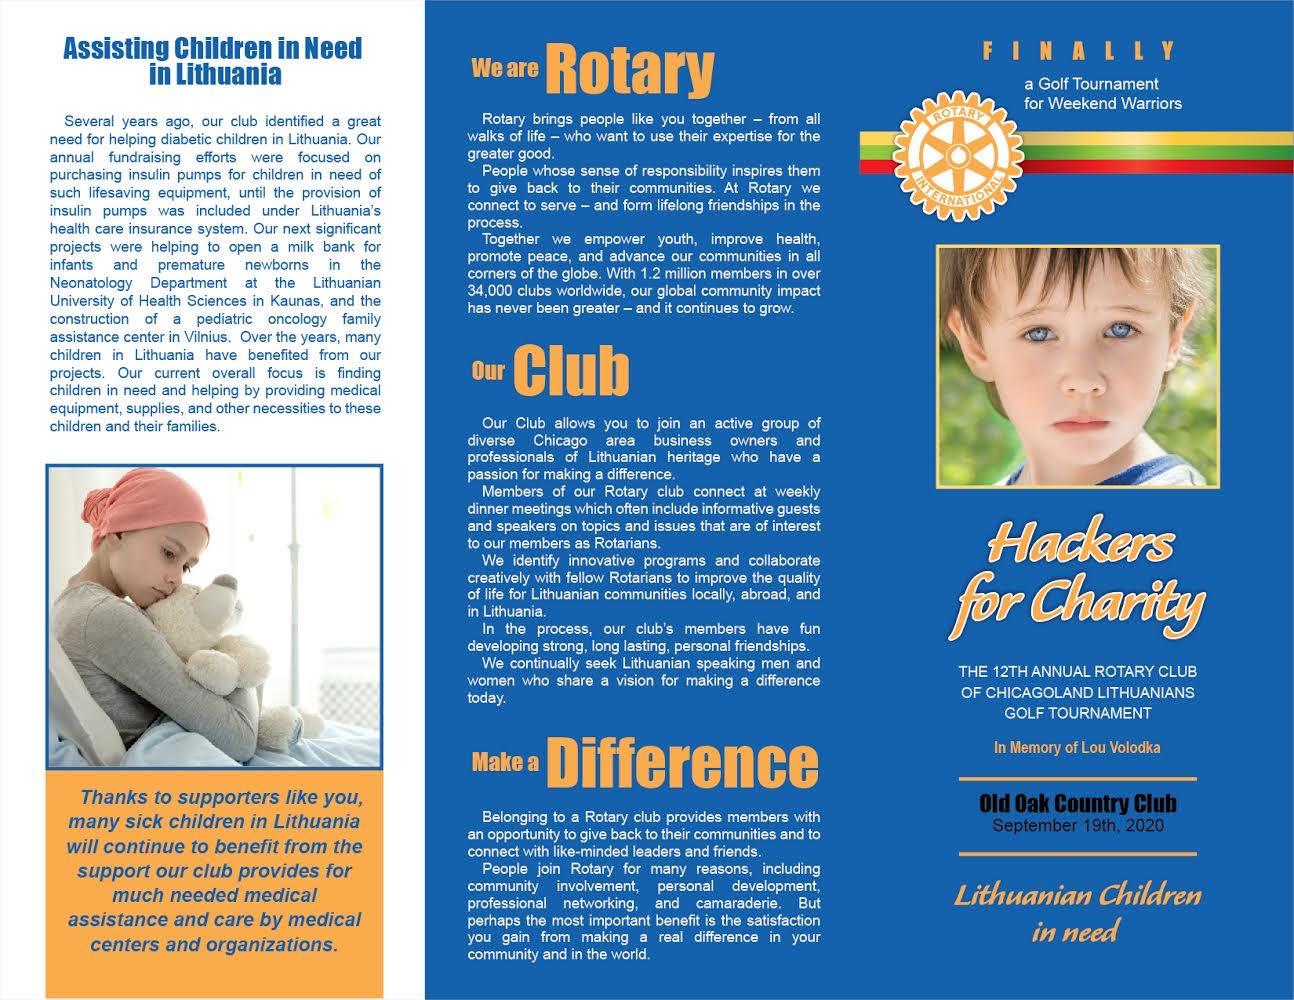 12th Annual Rotary Club of Chicagoland Lithuanians Charity Golf Tournament